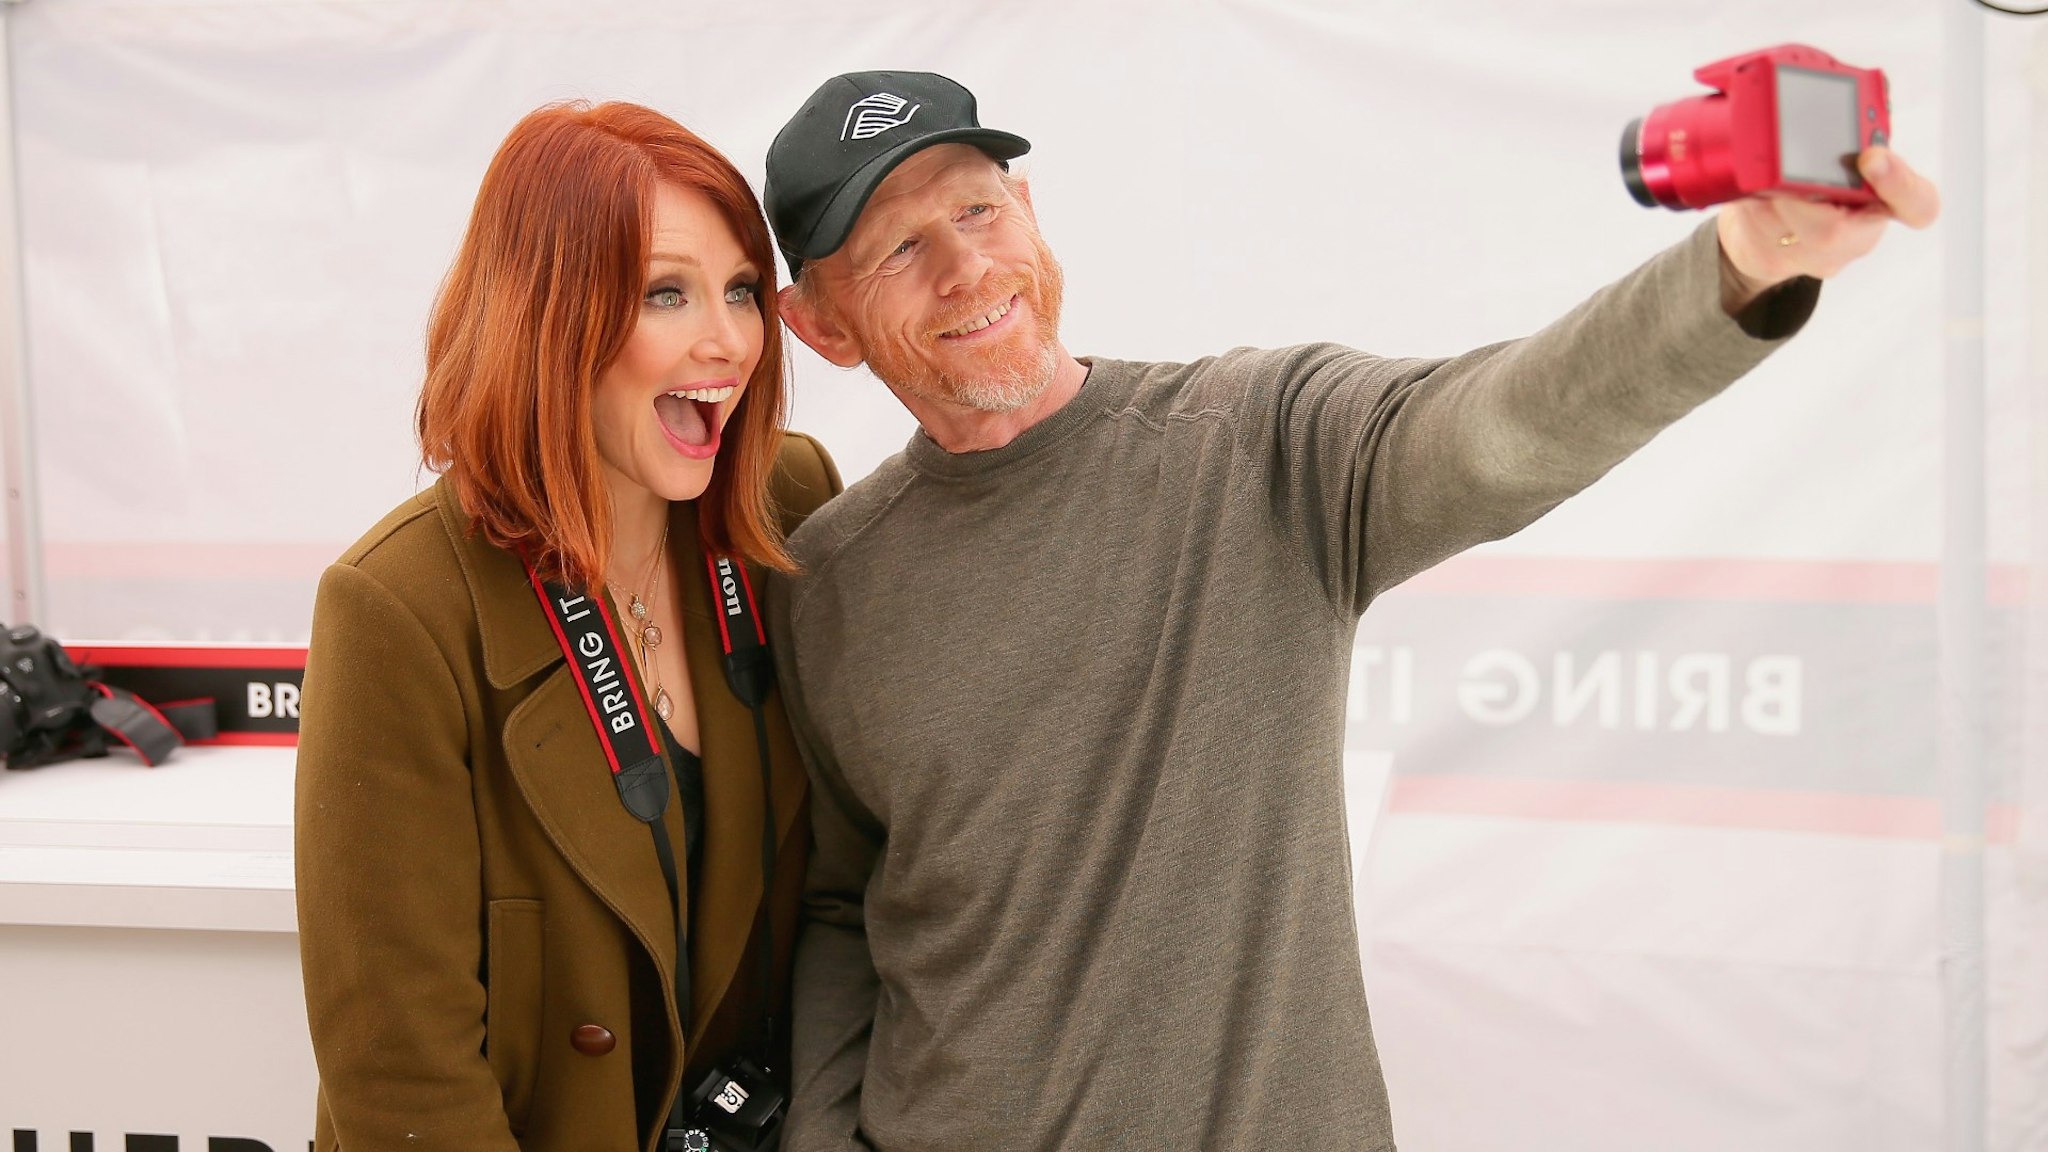 Actress Bryce Dallas Howard, with filmmaker Ron Howard, hosts the Canon Let It Snow Globe spectacle at Hollywood & Highland on December 13, 2014 in Hollywood, California.